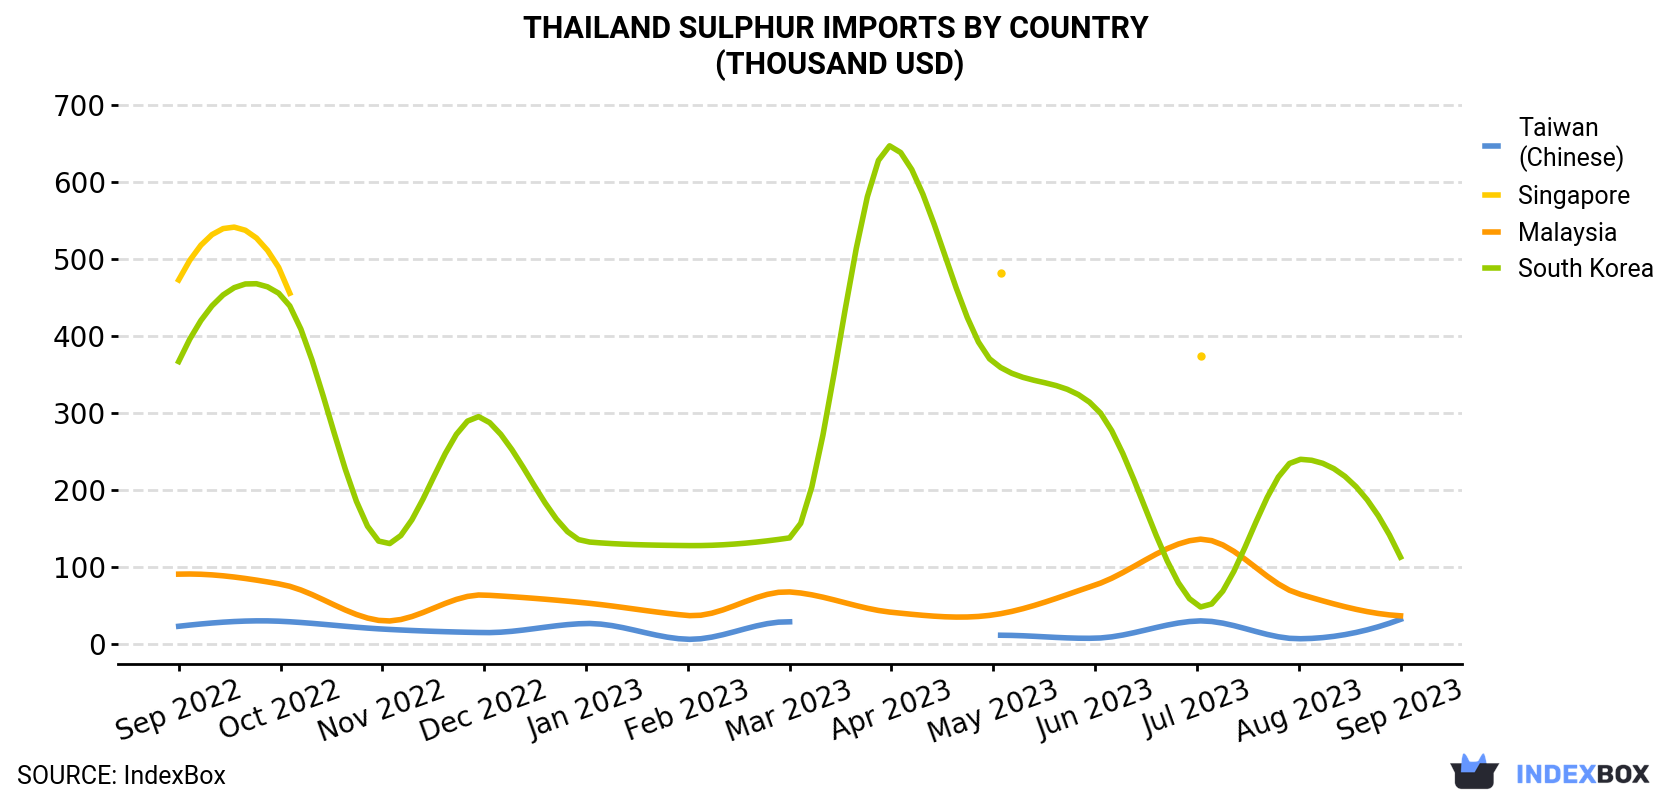 Thailand Sulphur Imports By Country (Thousand USD)